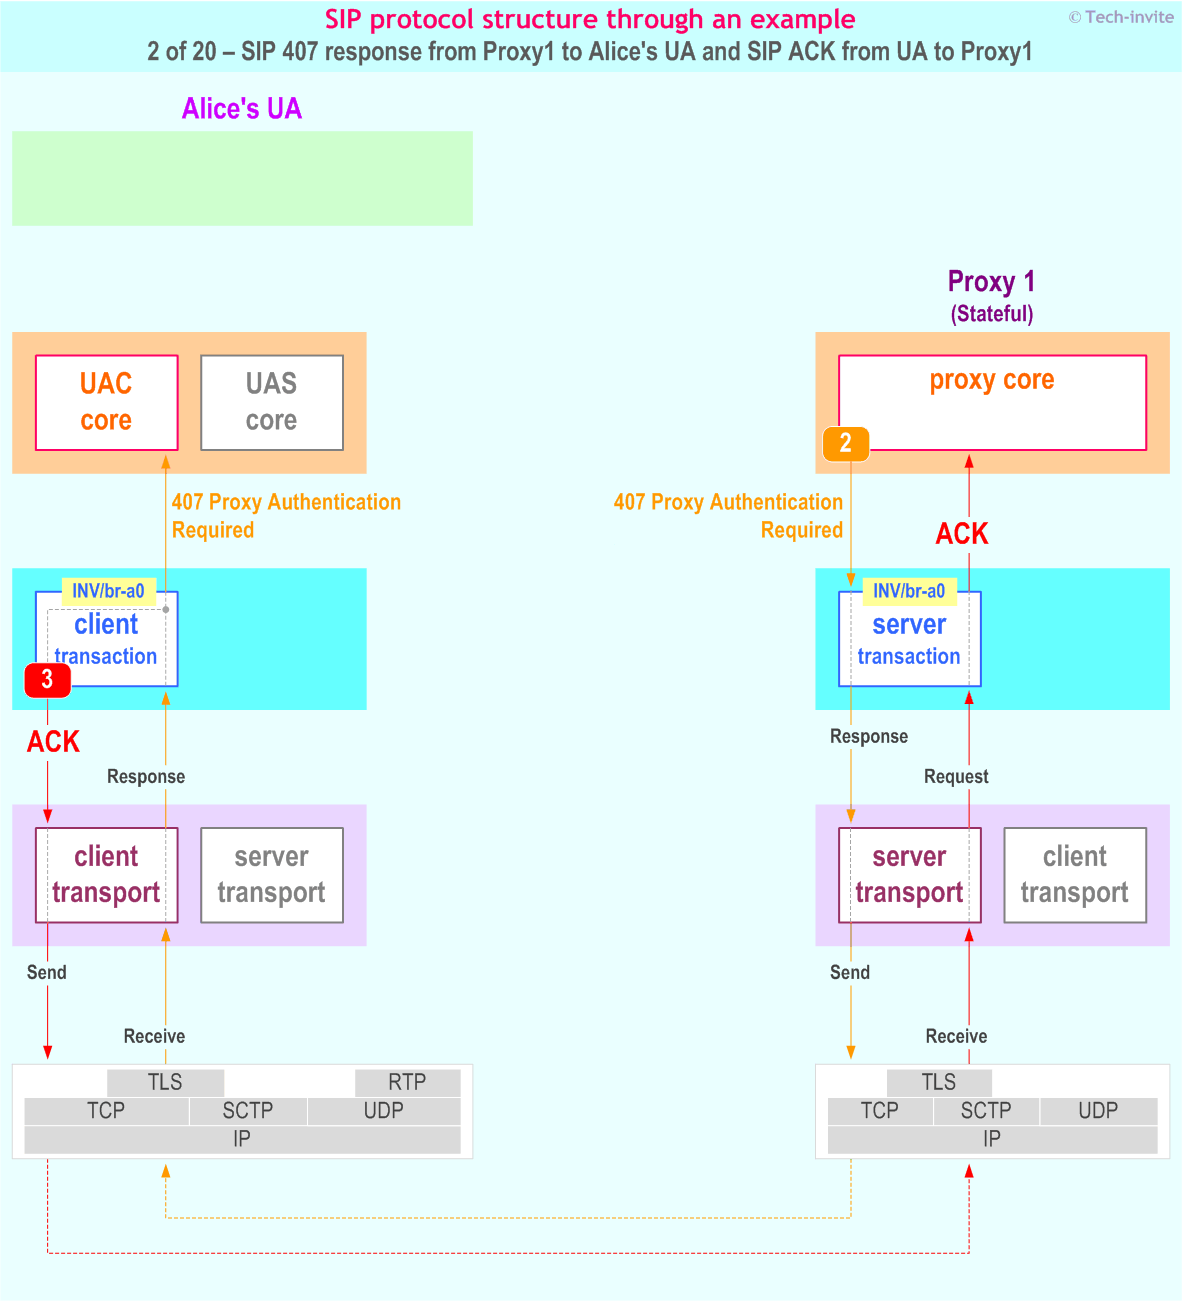 SIP protocol structure through an example: SIP 407 response from Proxy1 to Alice's UA, and SIP ACK from UA to Proxy1